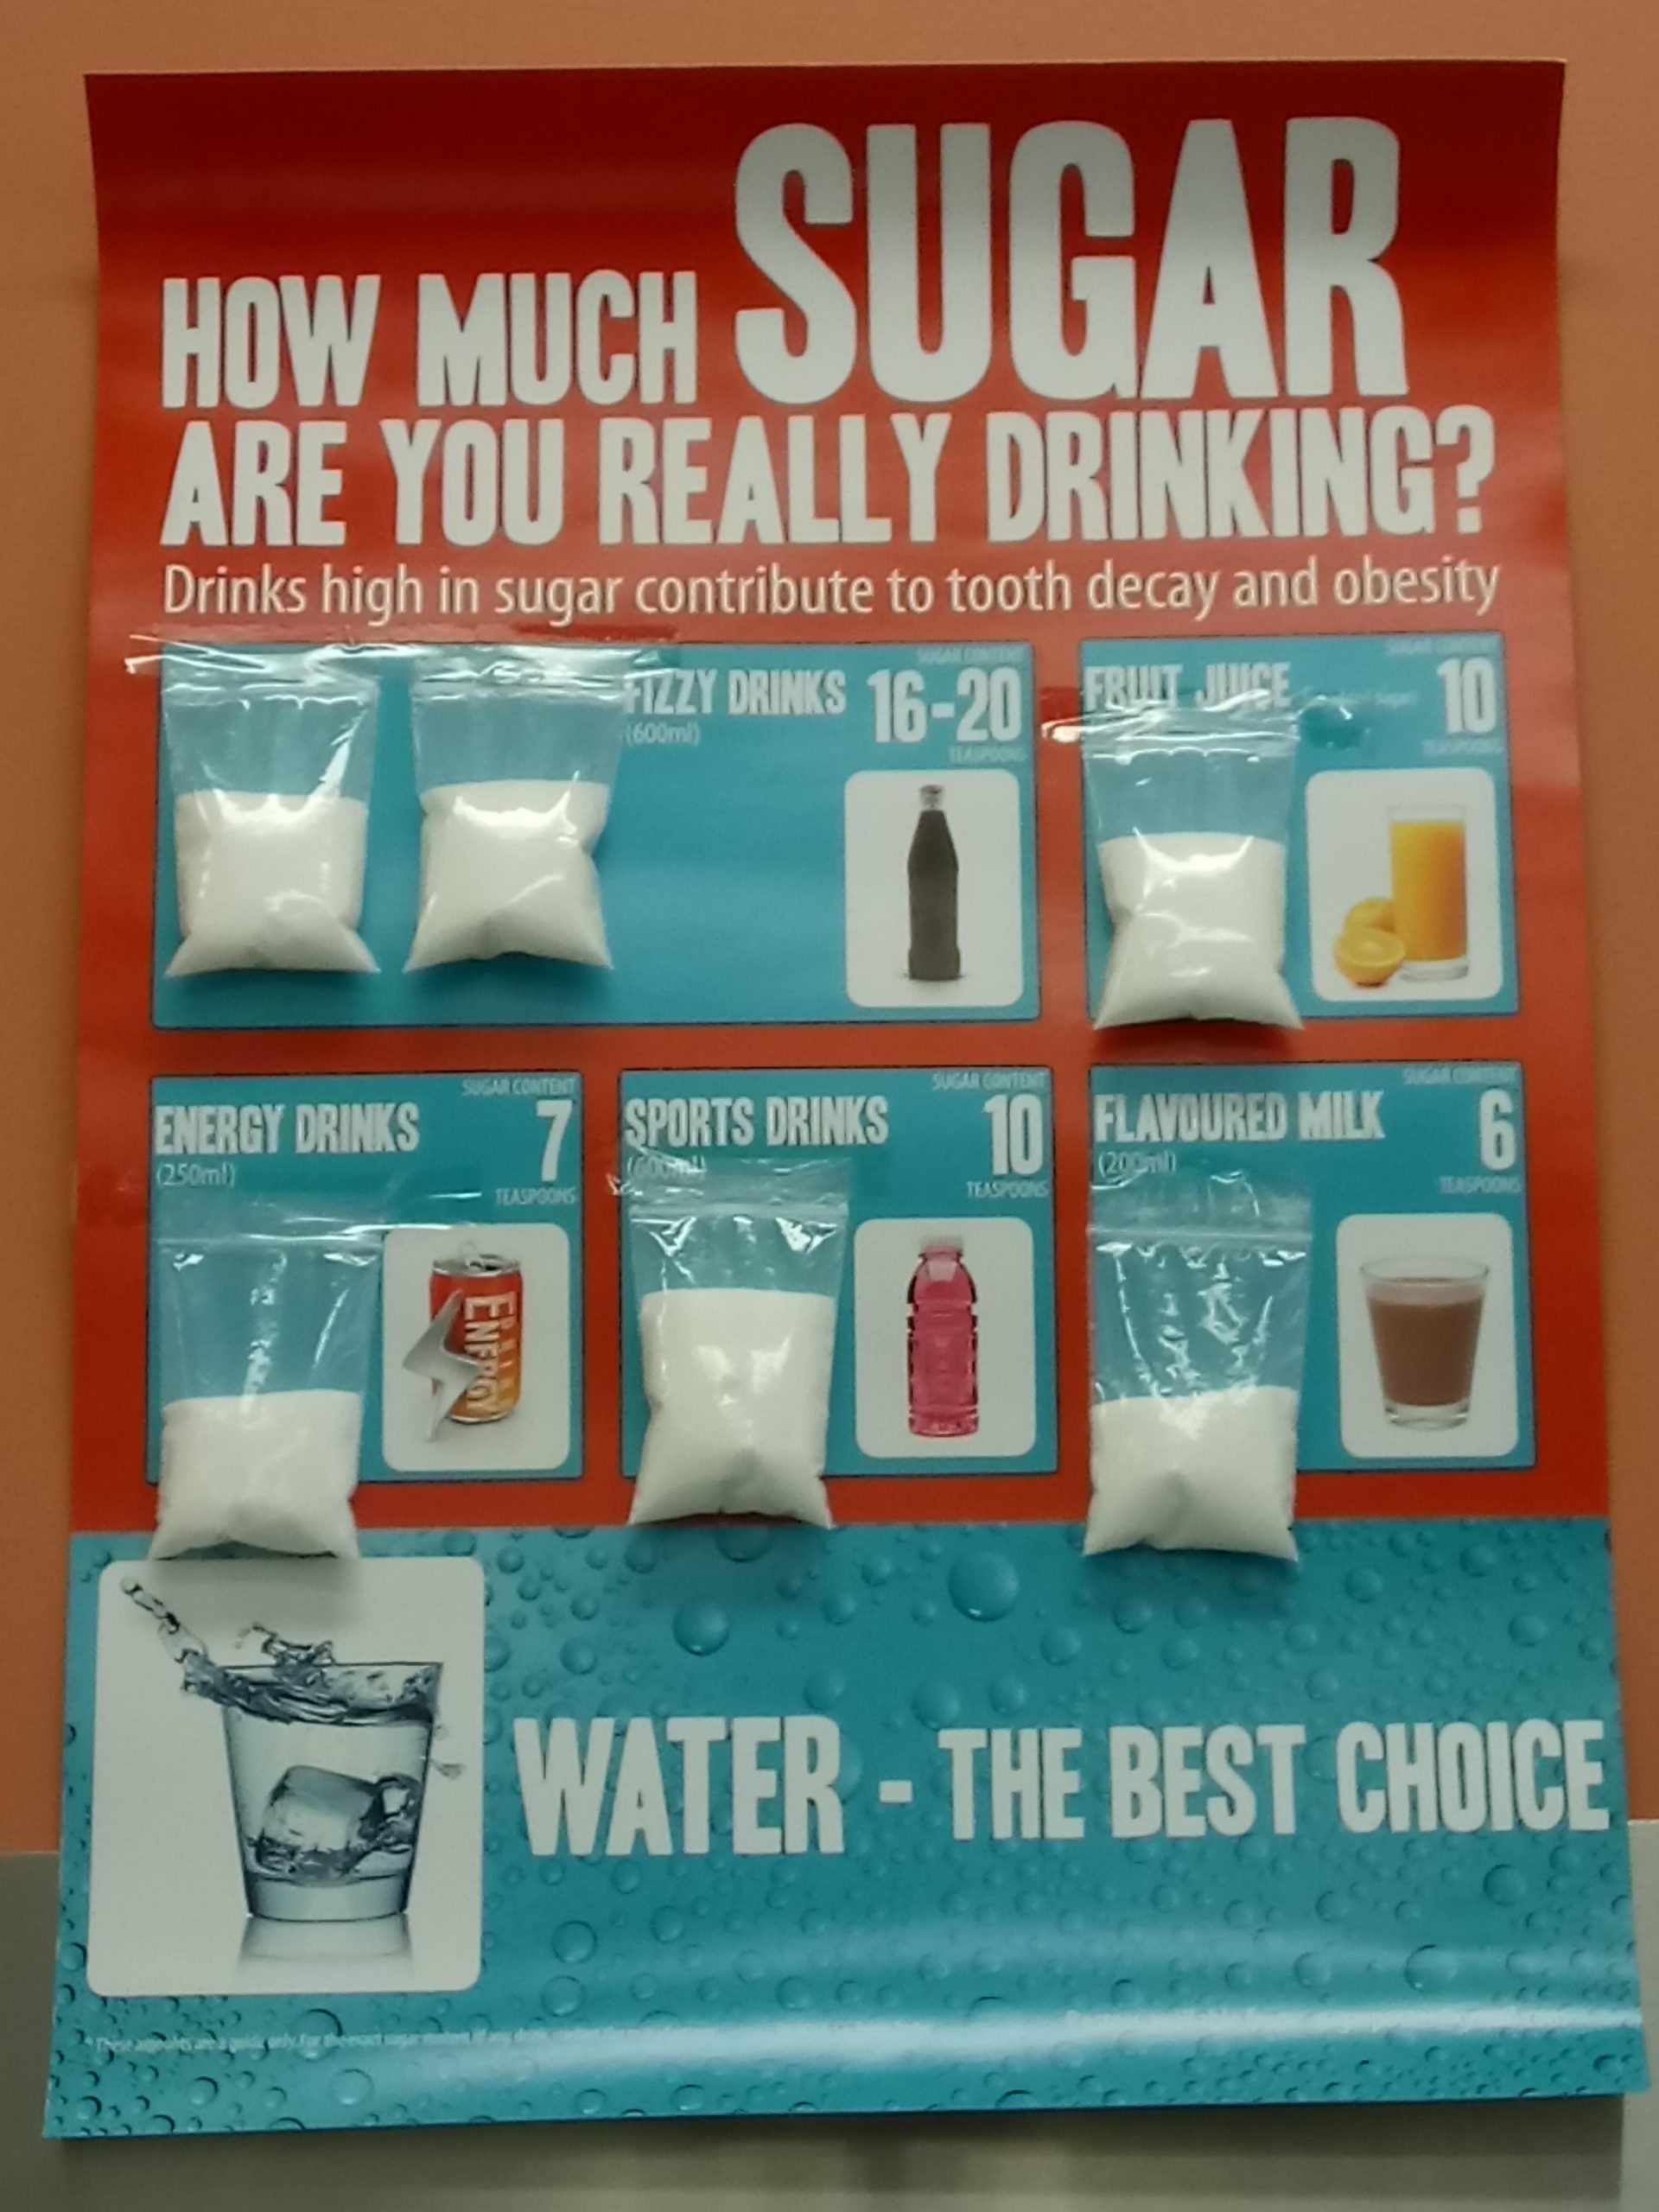 How much sugar are you really drinking? : coolguides